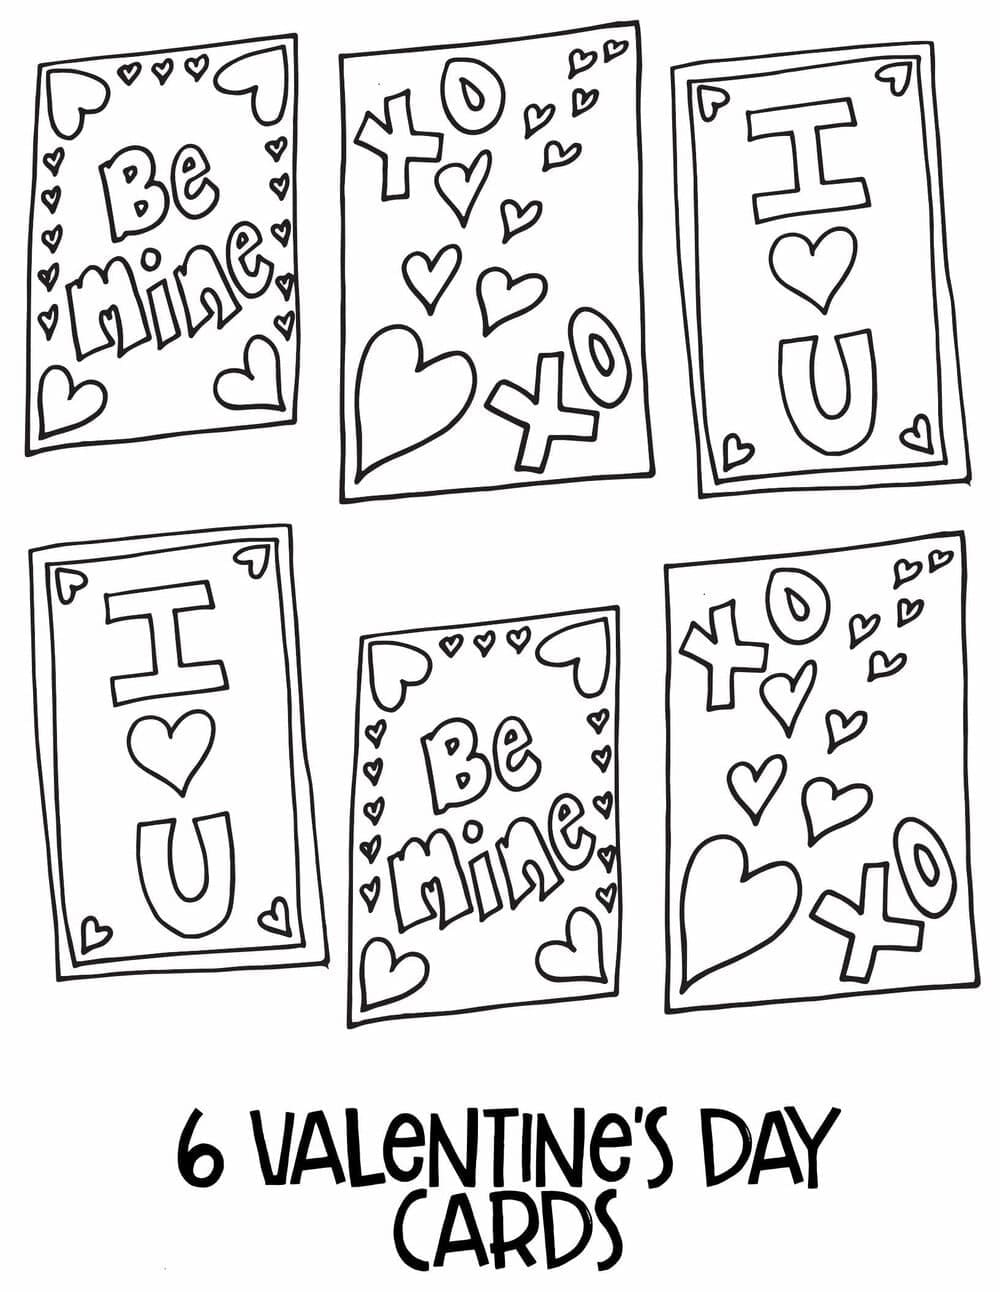 Valentines Cards coloring page Download Print or Color Online for Free